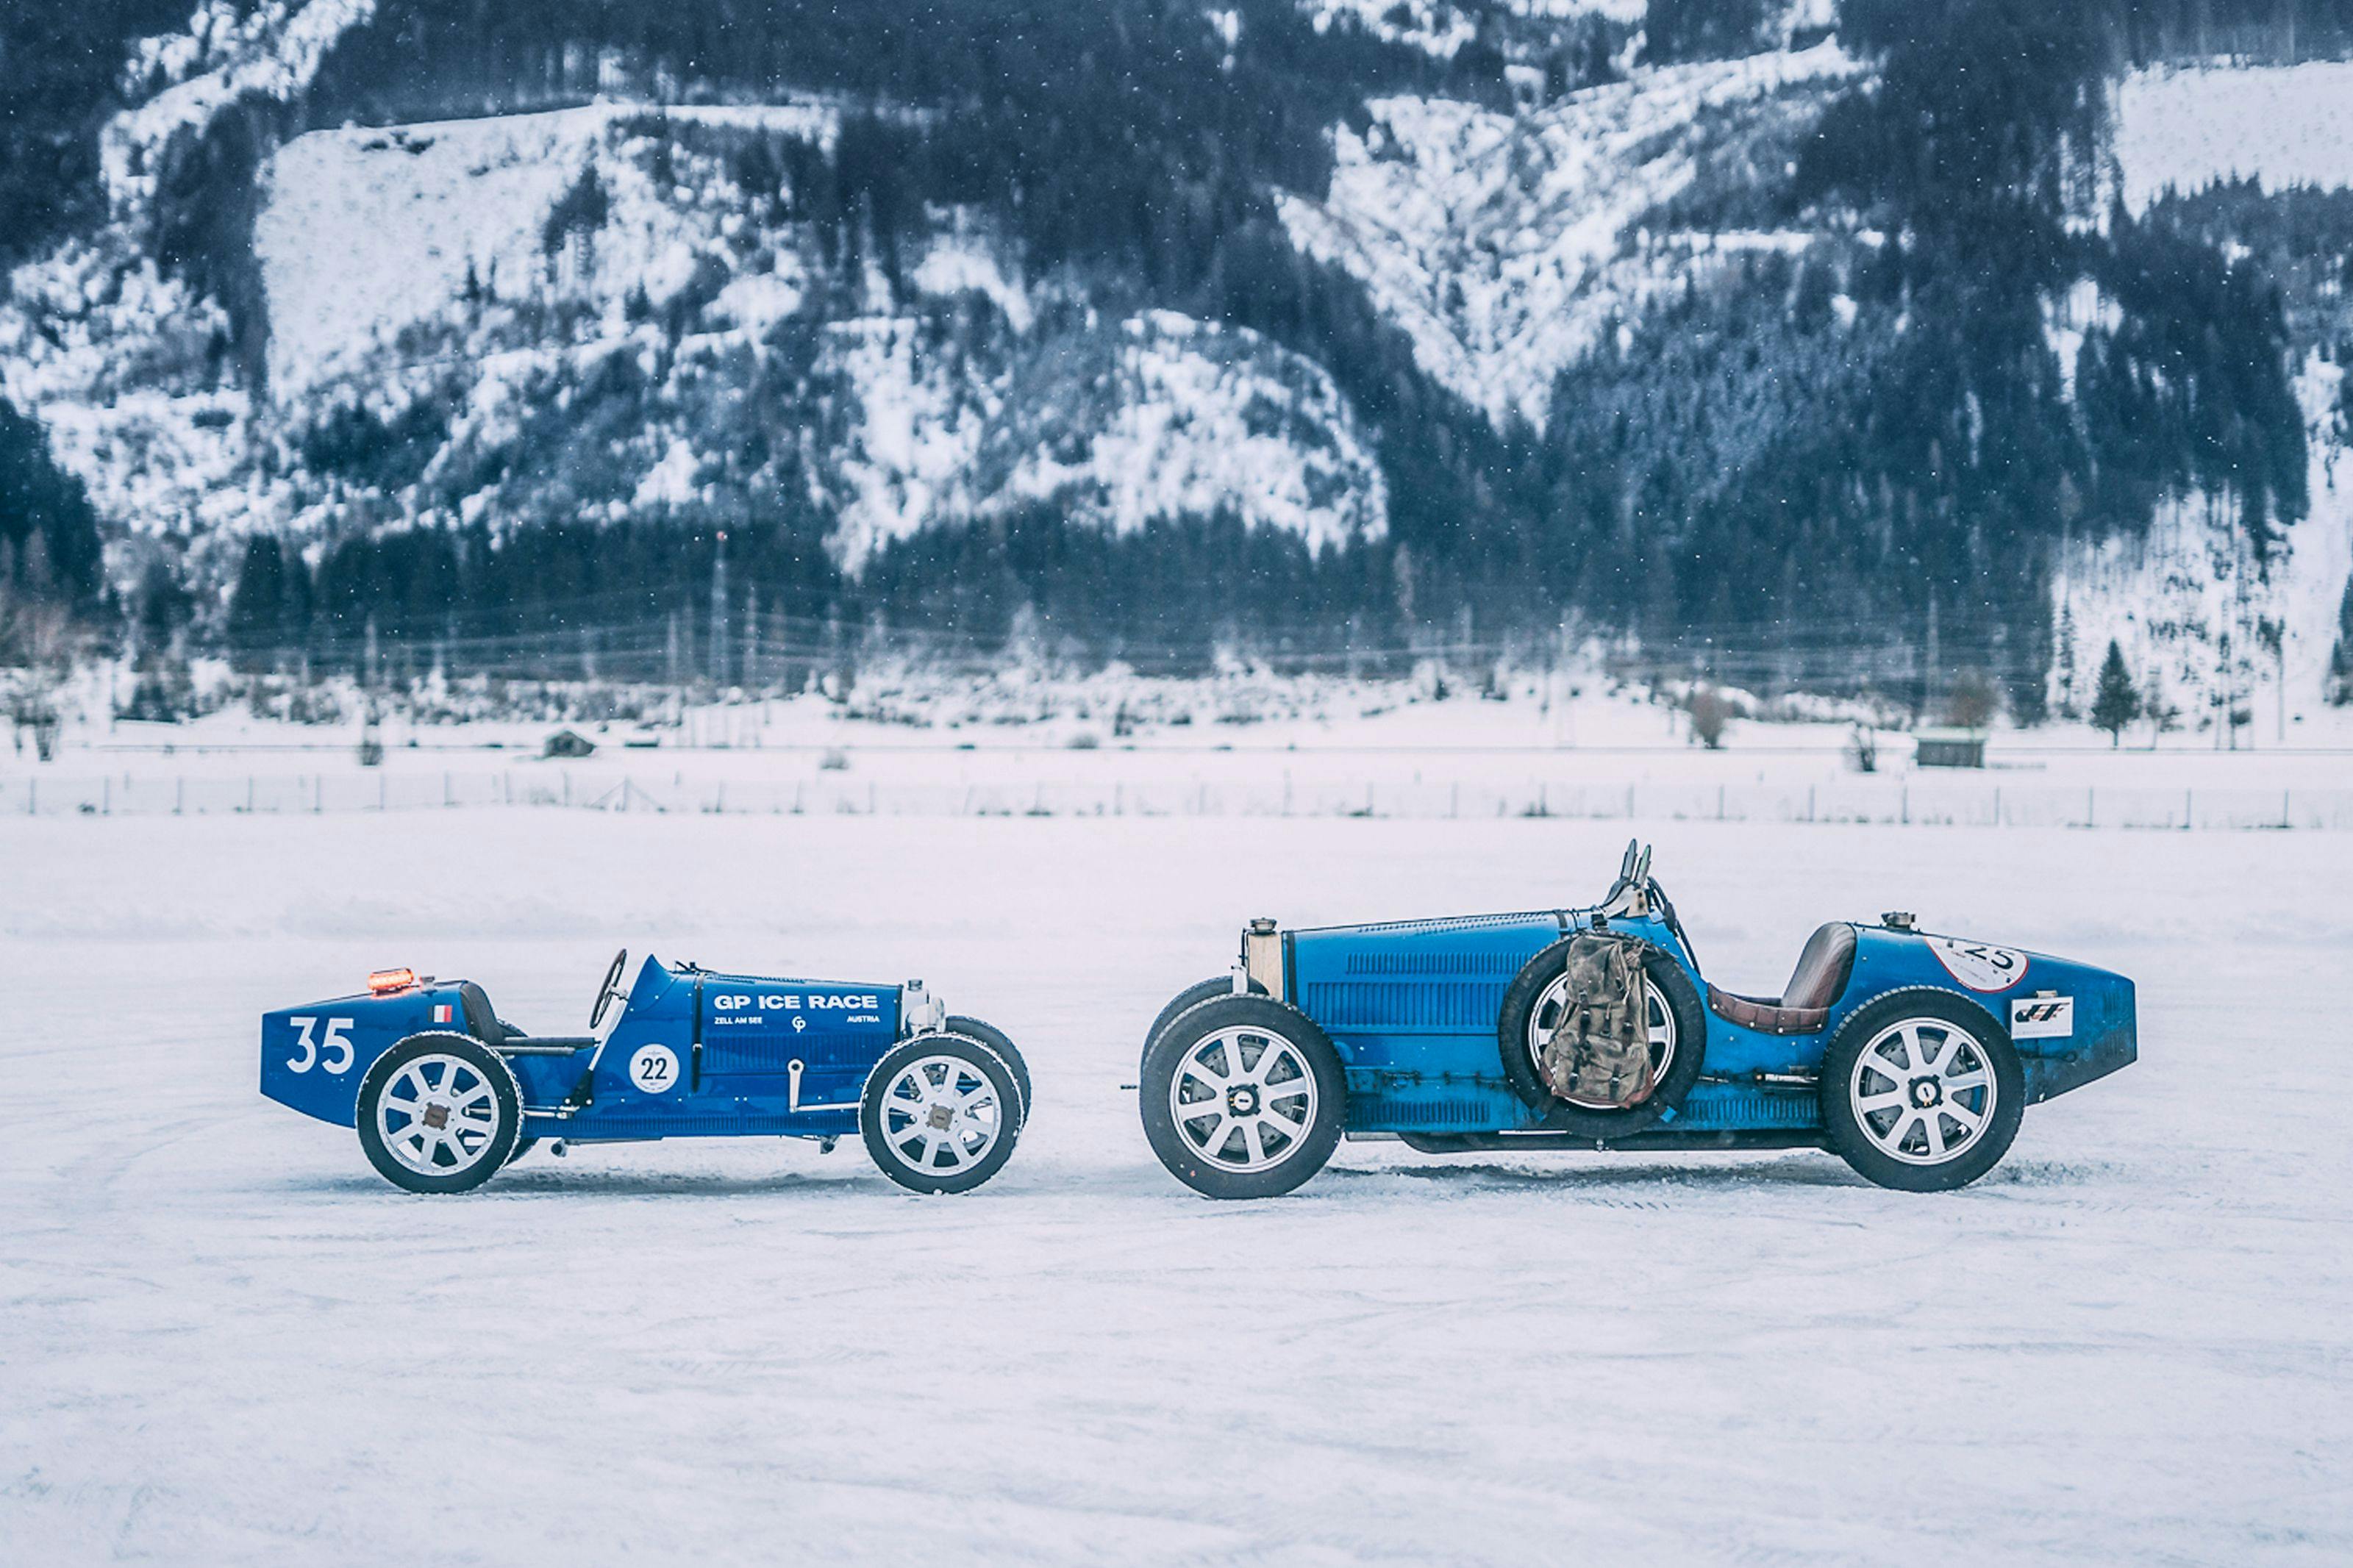 Bugatti Returns to GP Ice Race Over 60 Years After its Maiden Appearance